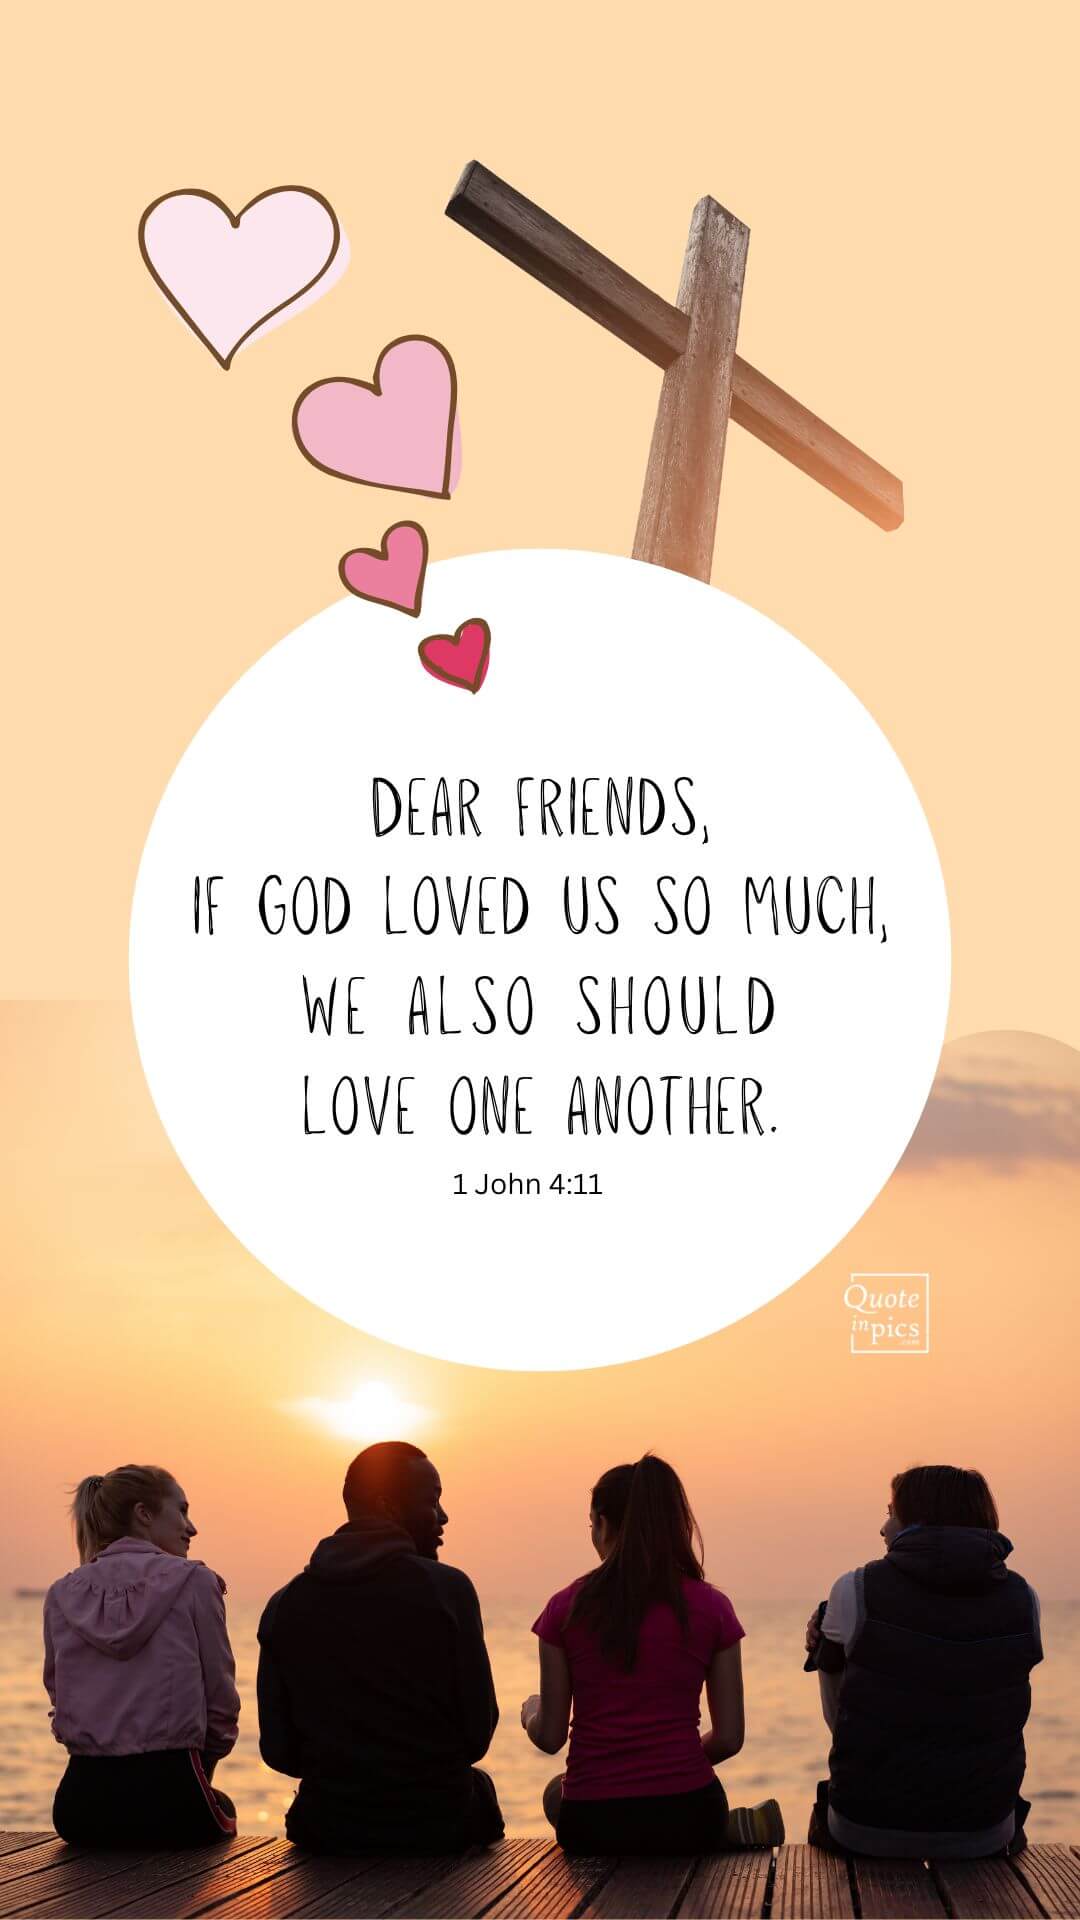 Dear friends, if God loved us so much, we also should love one another